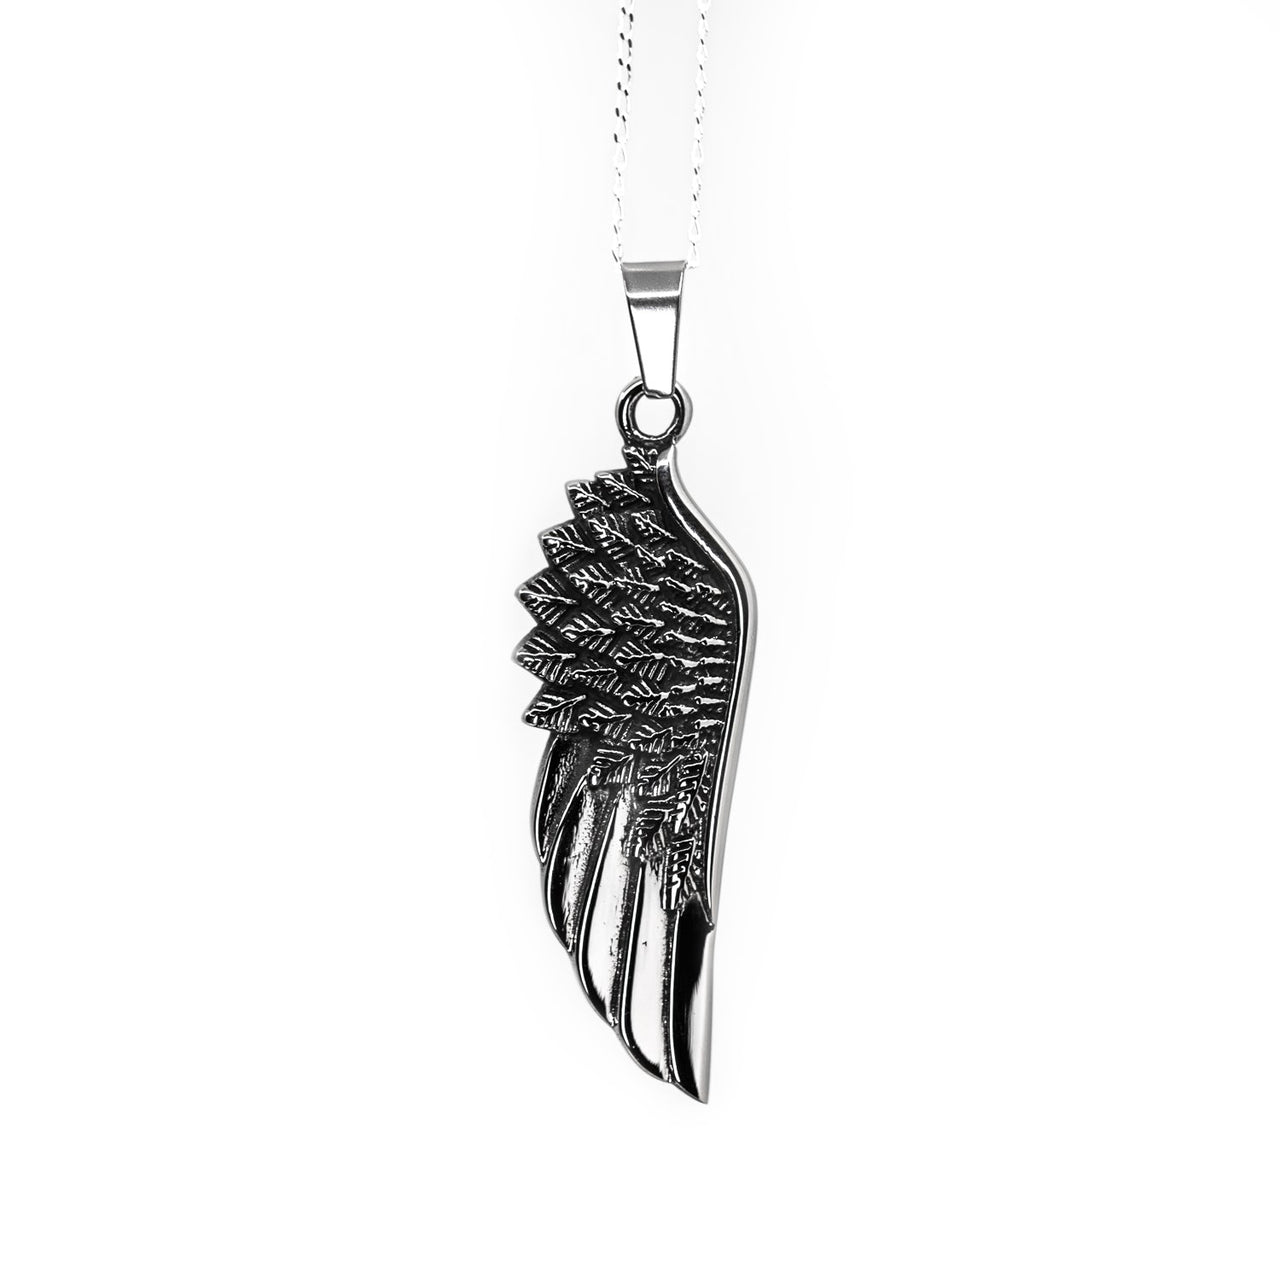 Stainless Steel Feather Pendant - Black Feather Design